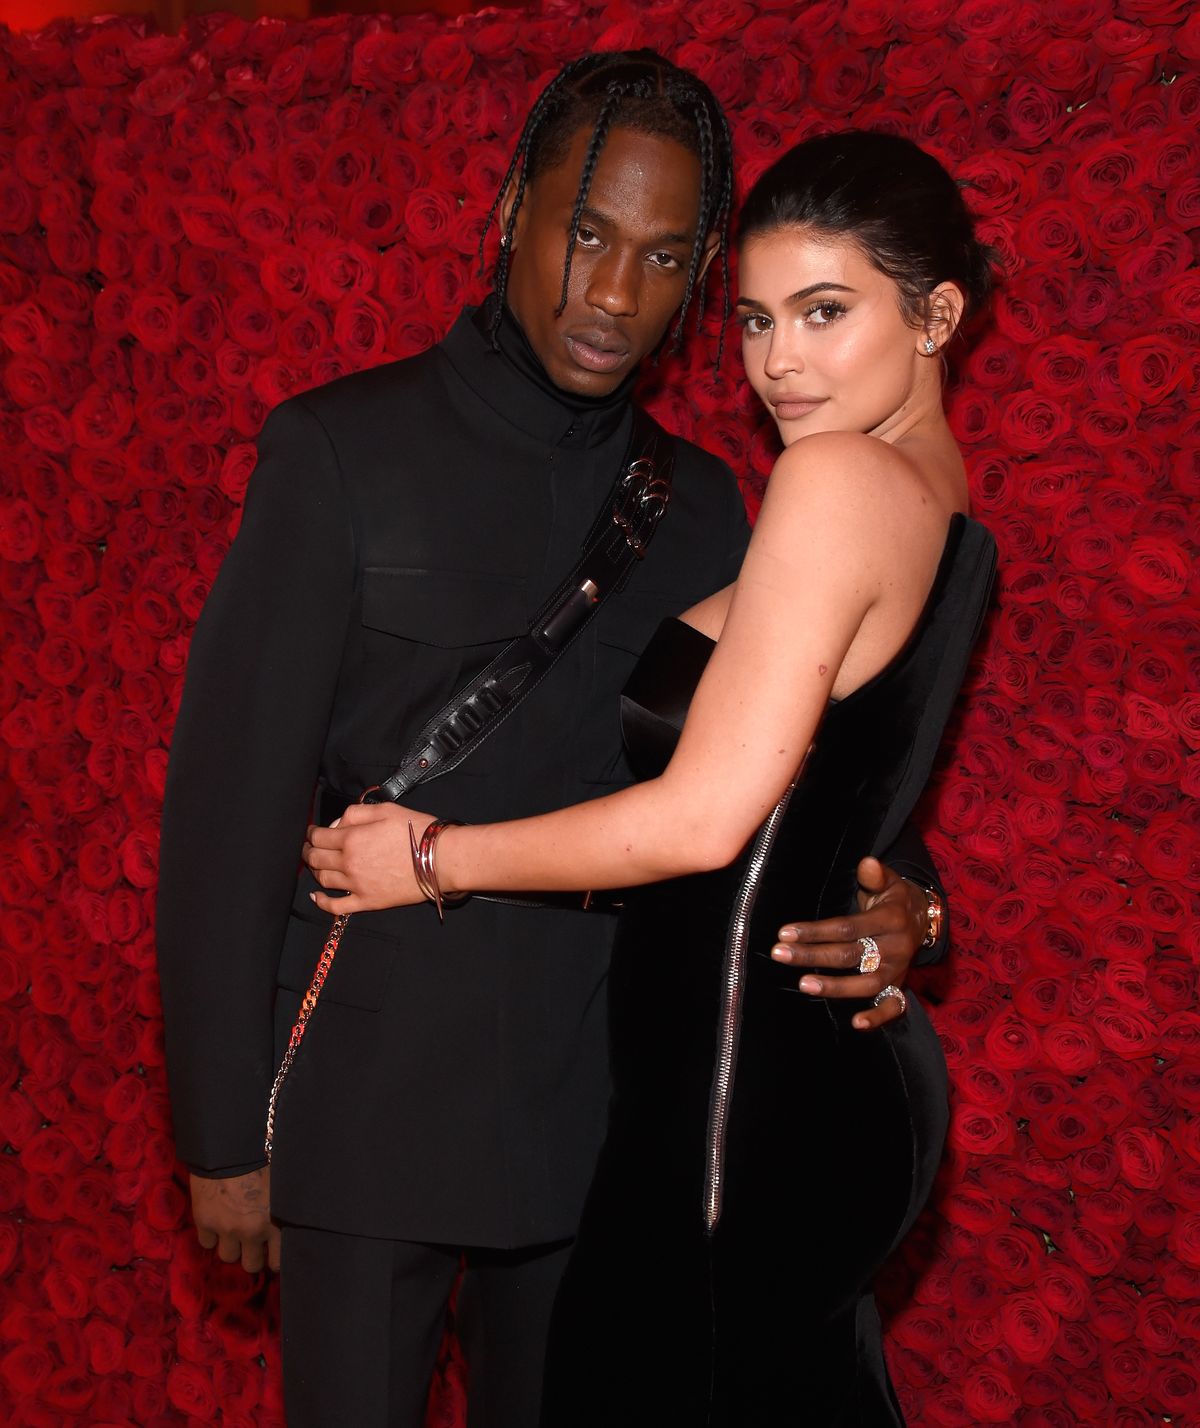 Big Lun Man And Sweet Girl Xxx - Kylie Jenner and Travis Scott's Complete Relationship Timeline